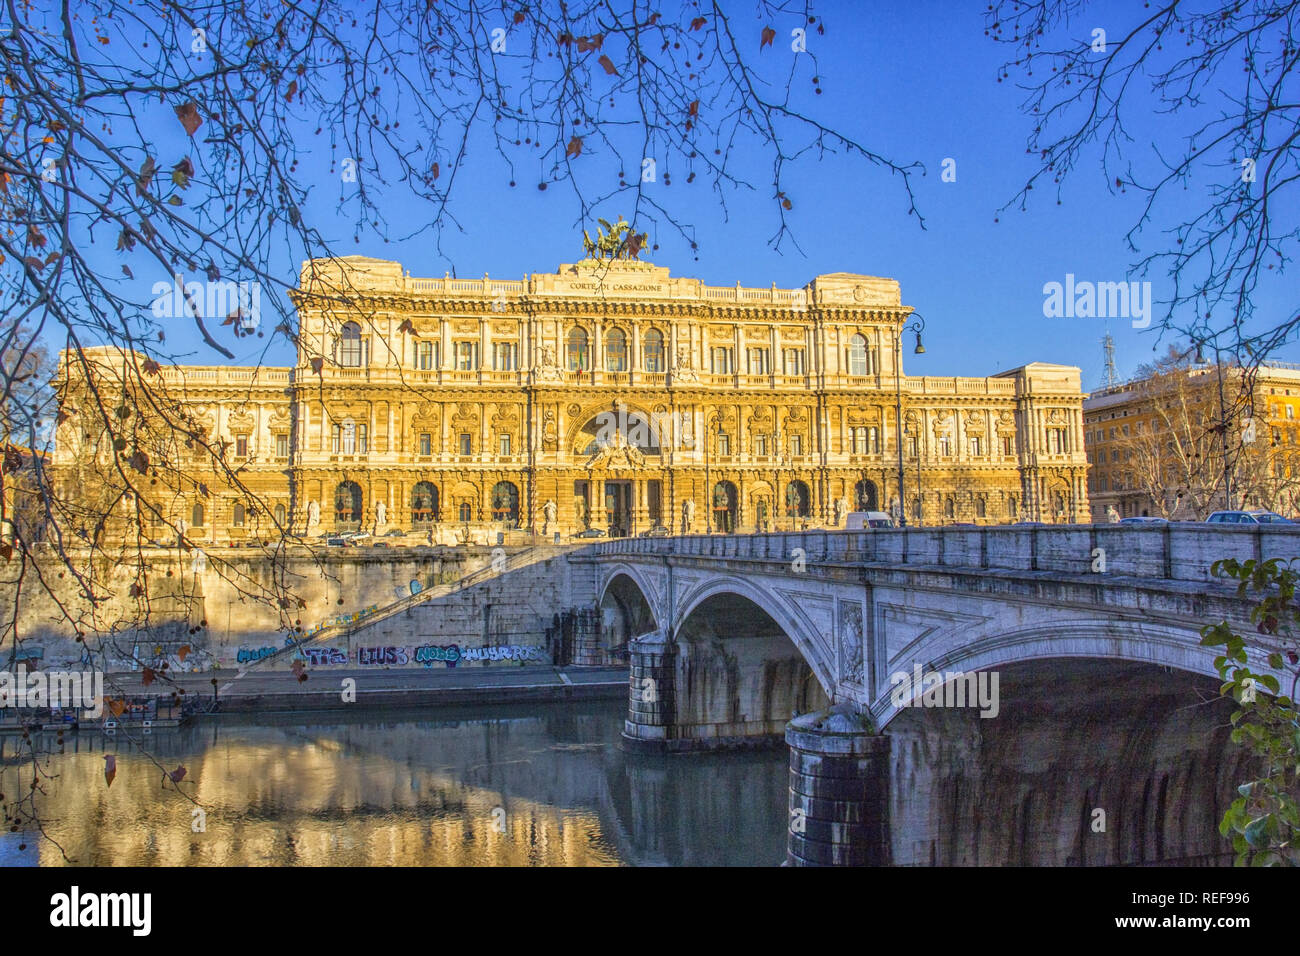 The palace of the supreme court of cassation, seen from the other side of the Tiber, Rome, Italy Stock Photo